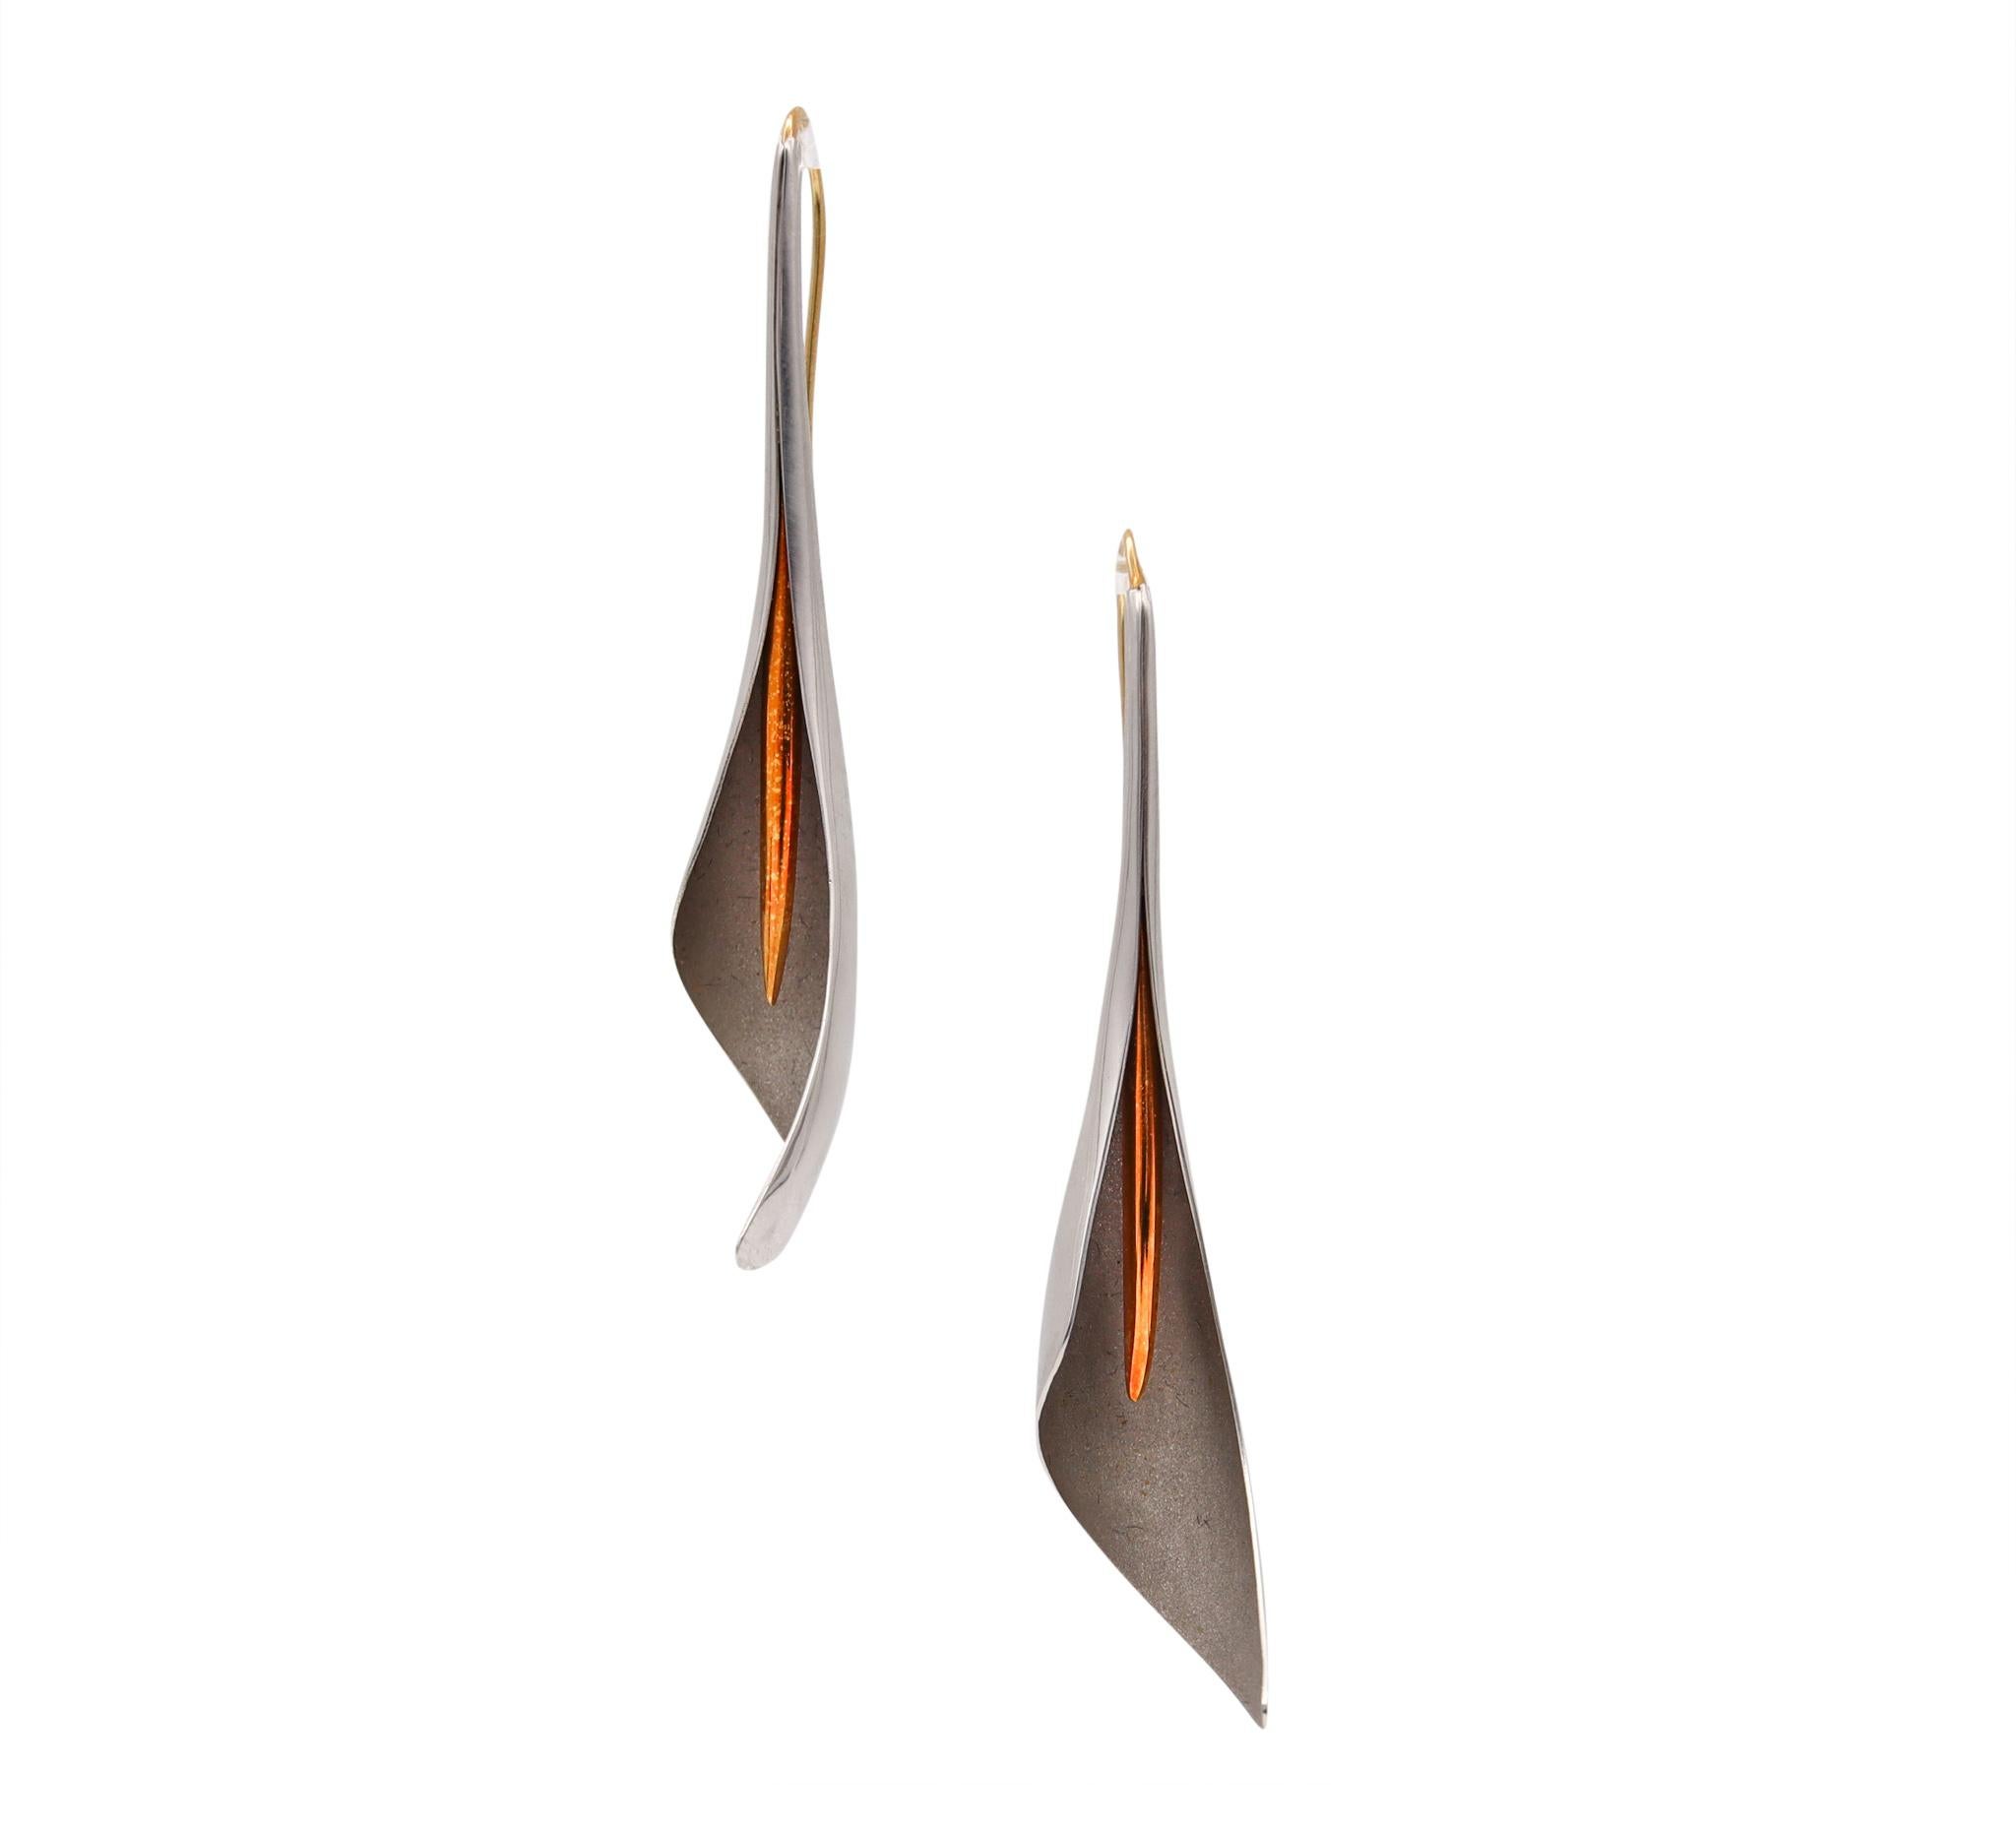 Lily drop earrings designed by Michael Good.

A beautiful elegant dangle pair, created talented goldsmith-artist Michael Good, with the stylized shape of the lily flower with pistils. They was crafted in solid .850/.999 platinum and 18 kt yellow